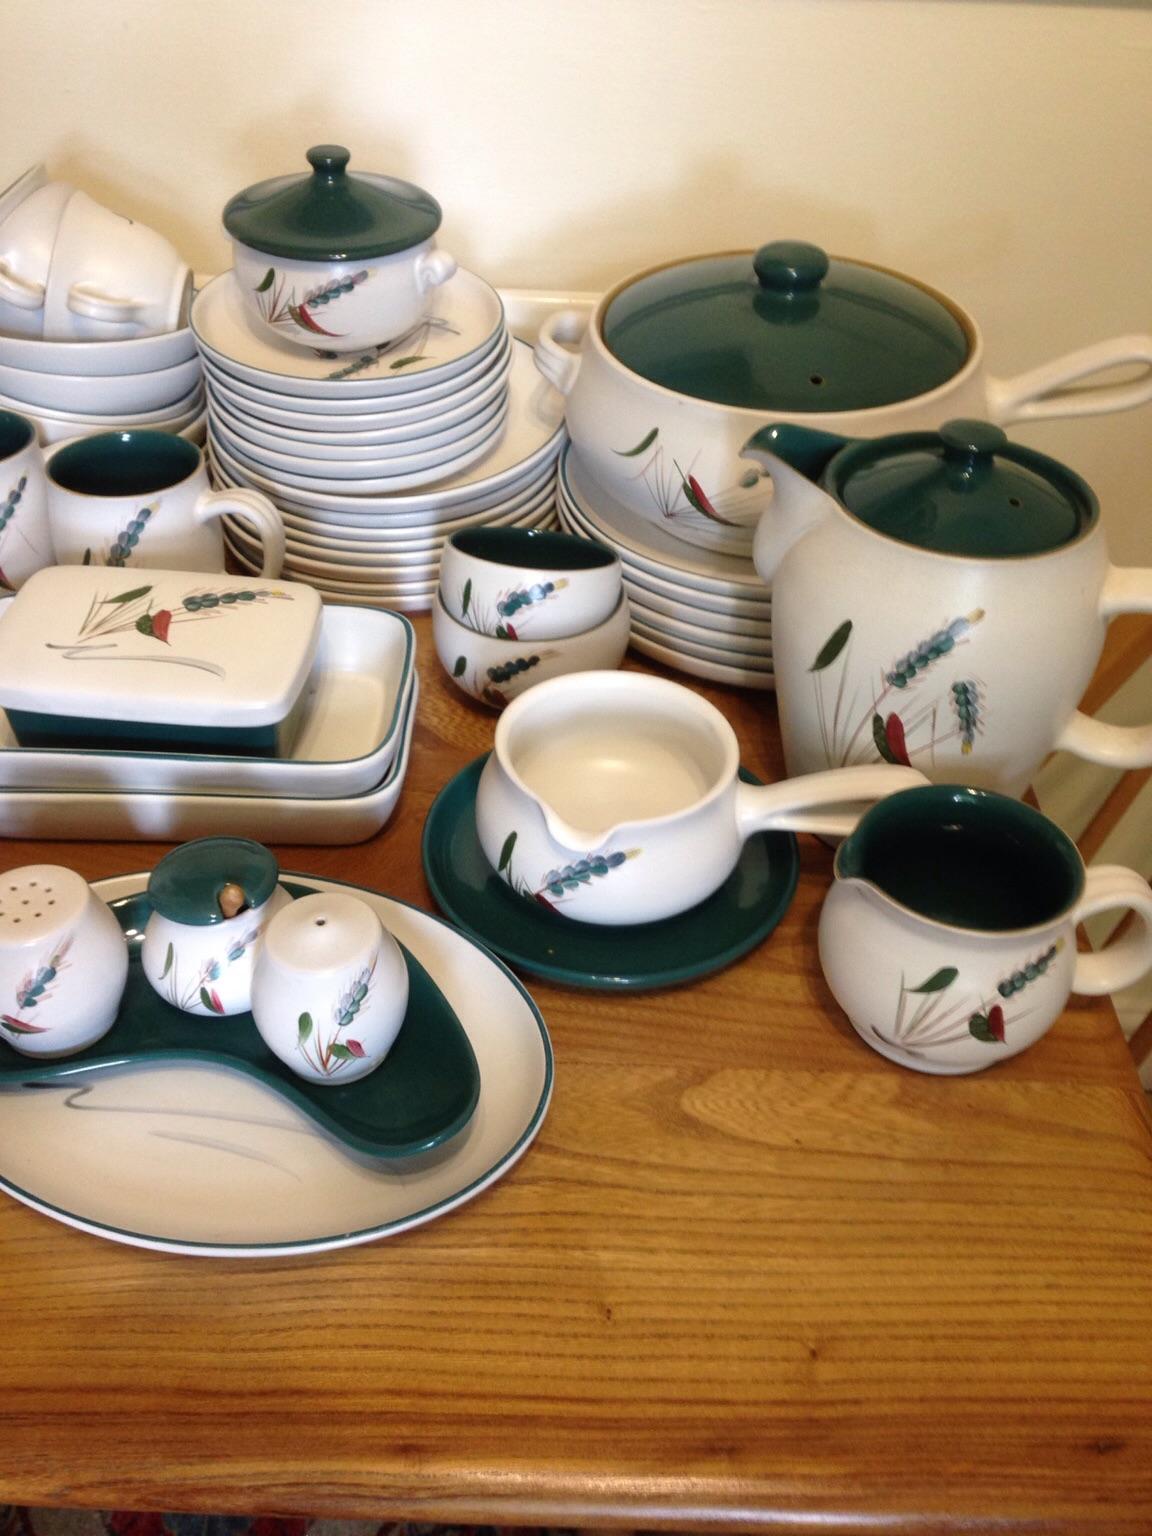 Denby GREENWHEAT TEA SERVICE ITEMS VARIOUS ITEMS AVAILABLE EXC COND 